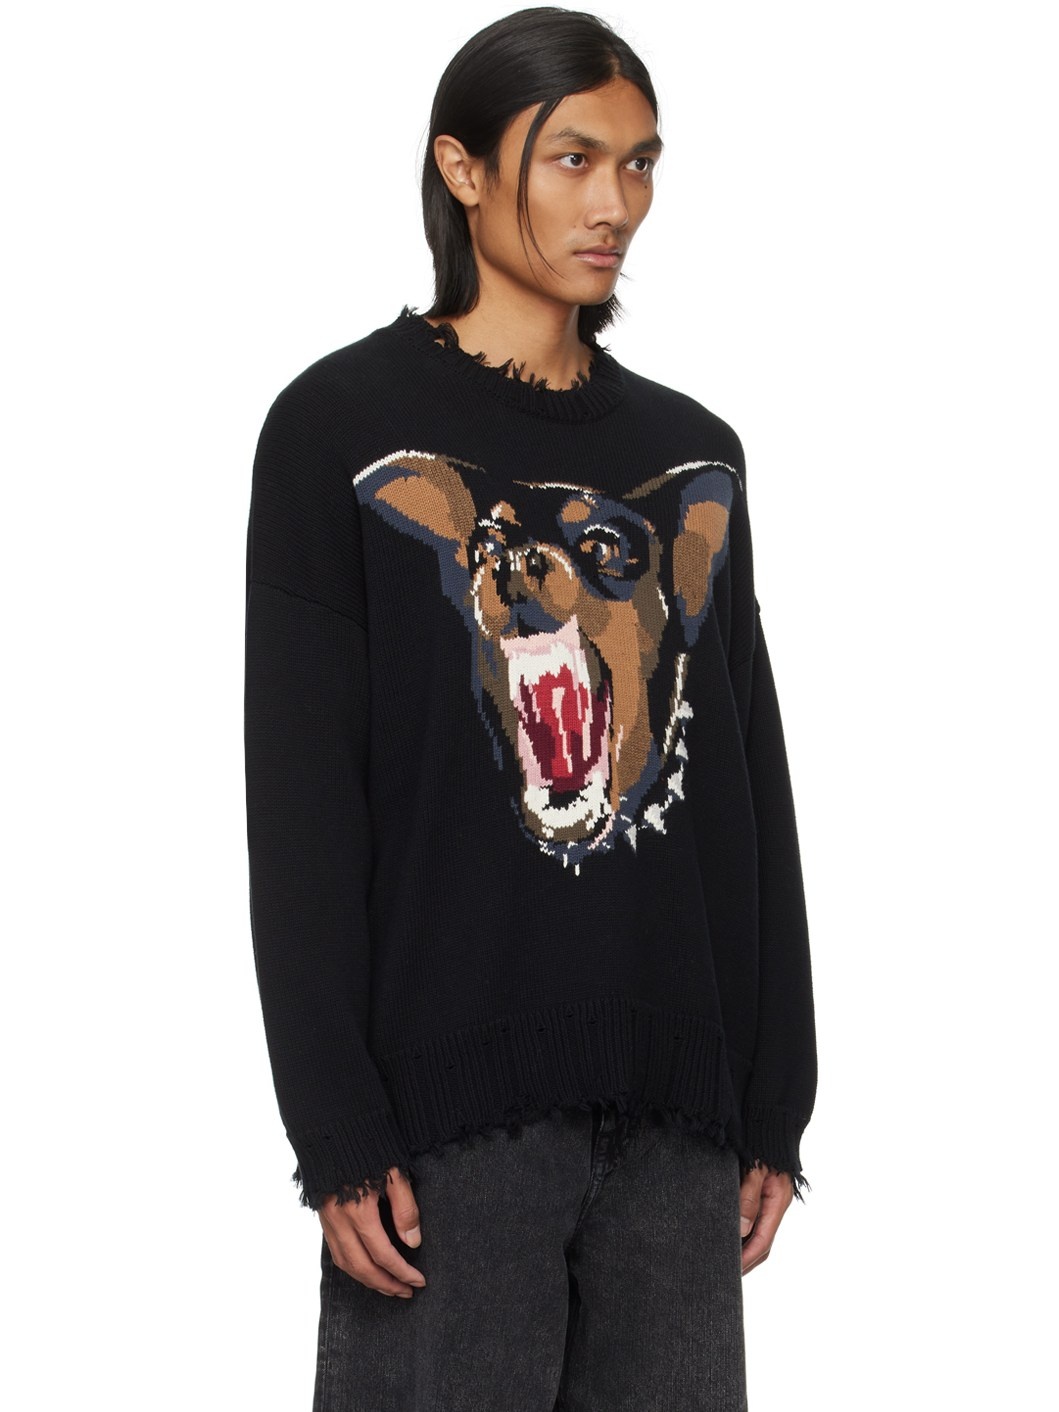 Black Angry Chihuahua Sweater - 2